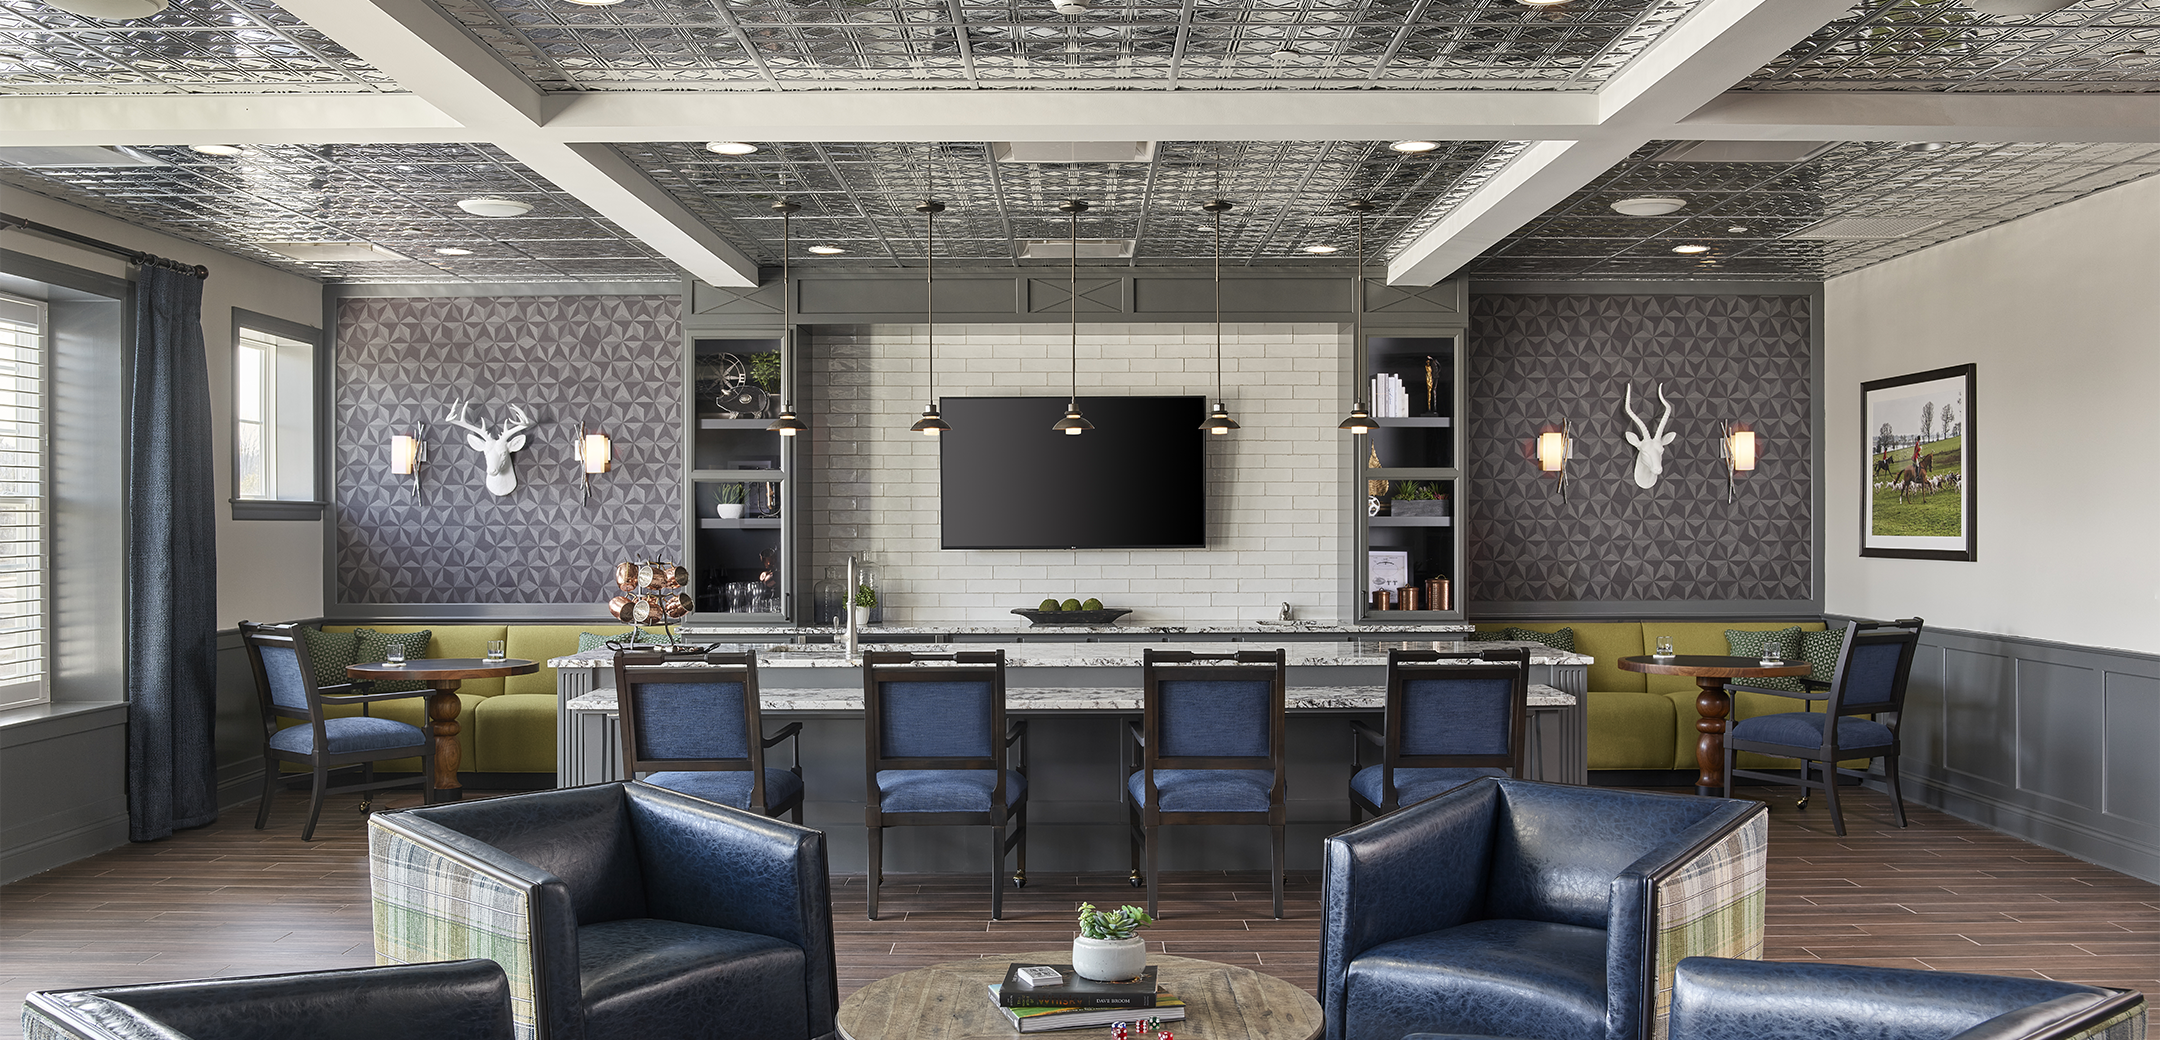 An interior view of the Arbor Terrace Exton rest space with reflective metallic ceiling, blue leather chairs and a bar in the background.